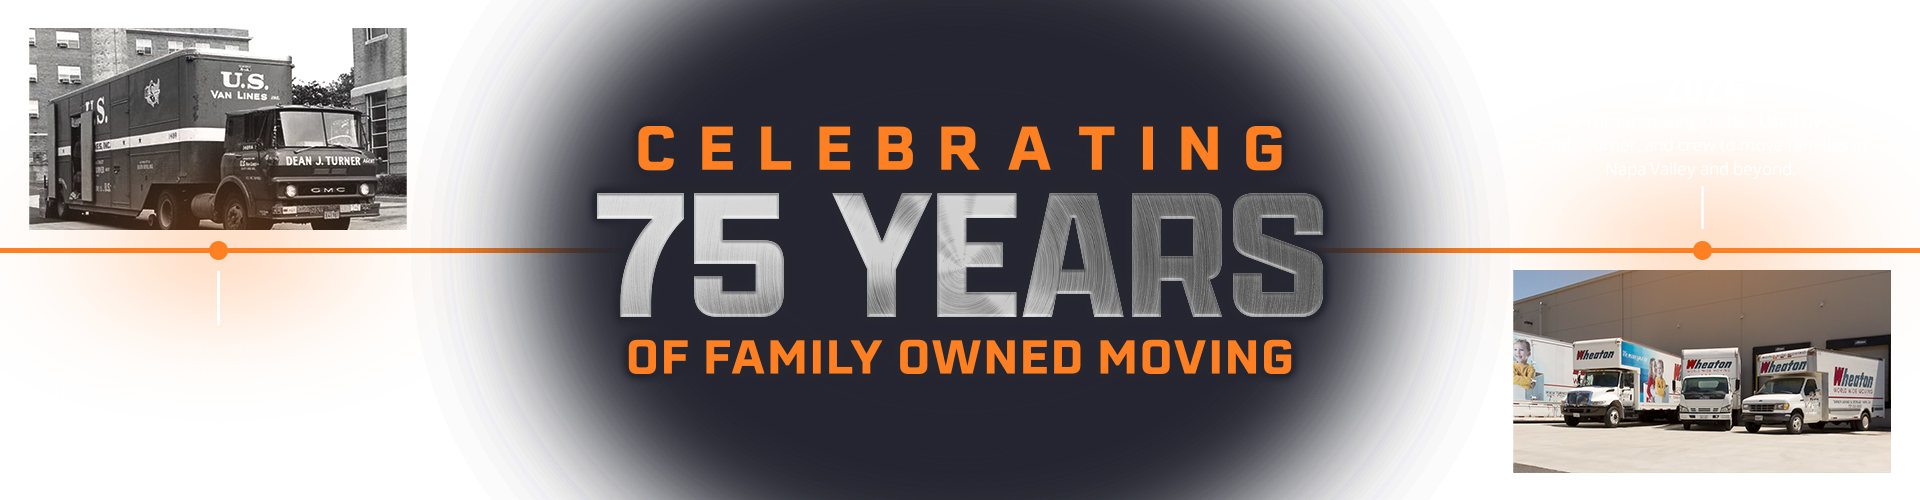 Celebrating 75 years of Familiy owned moving